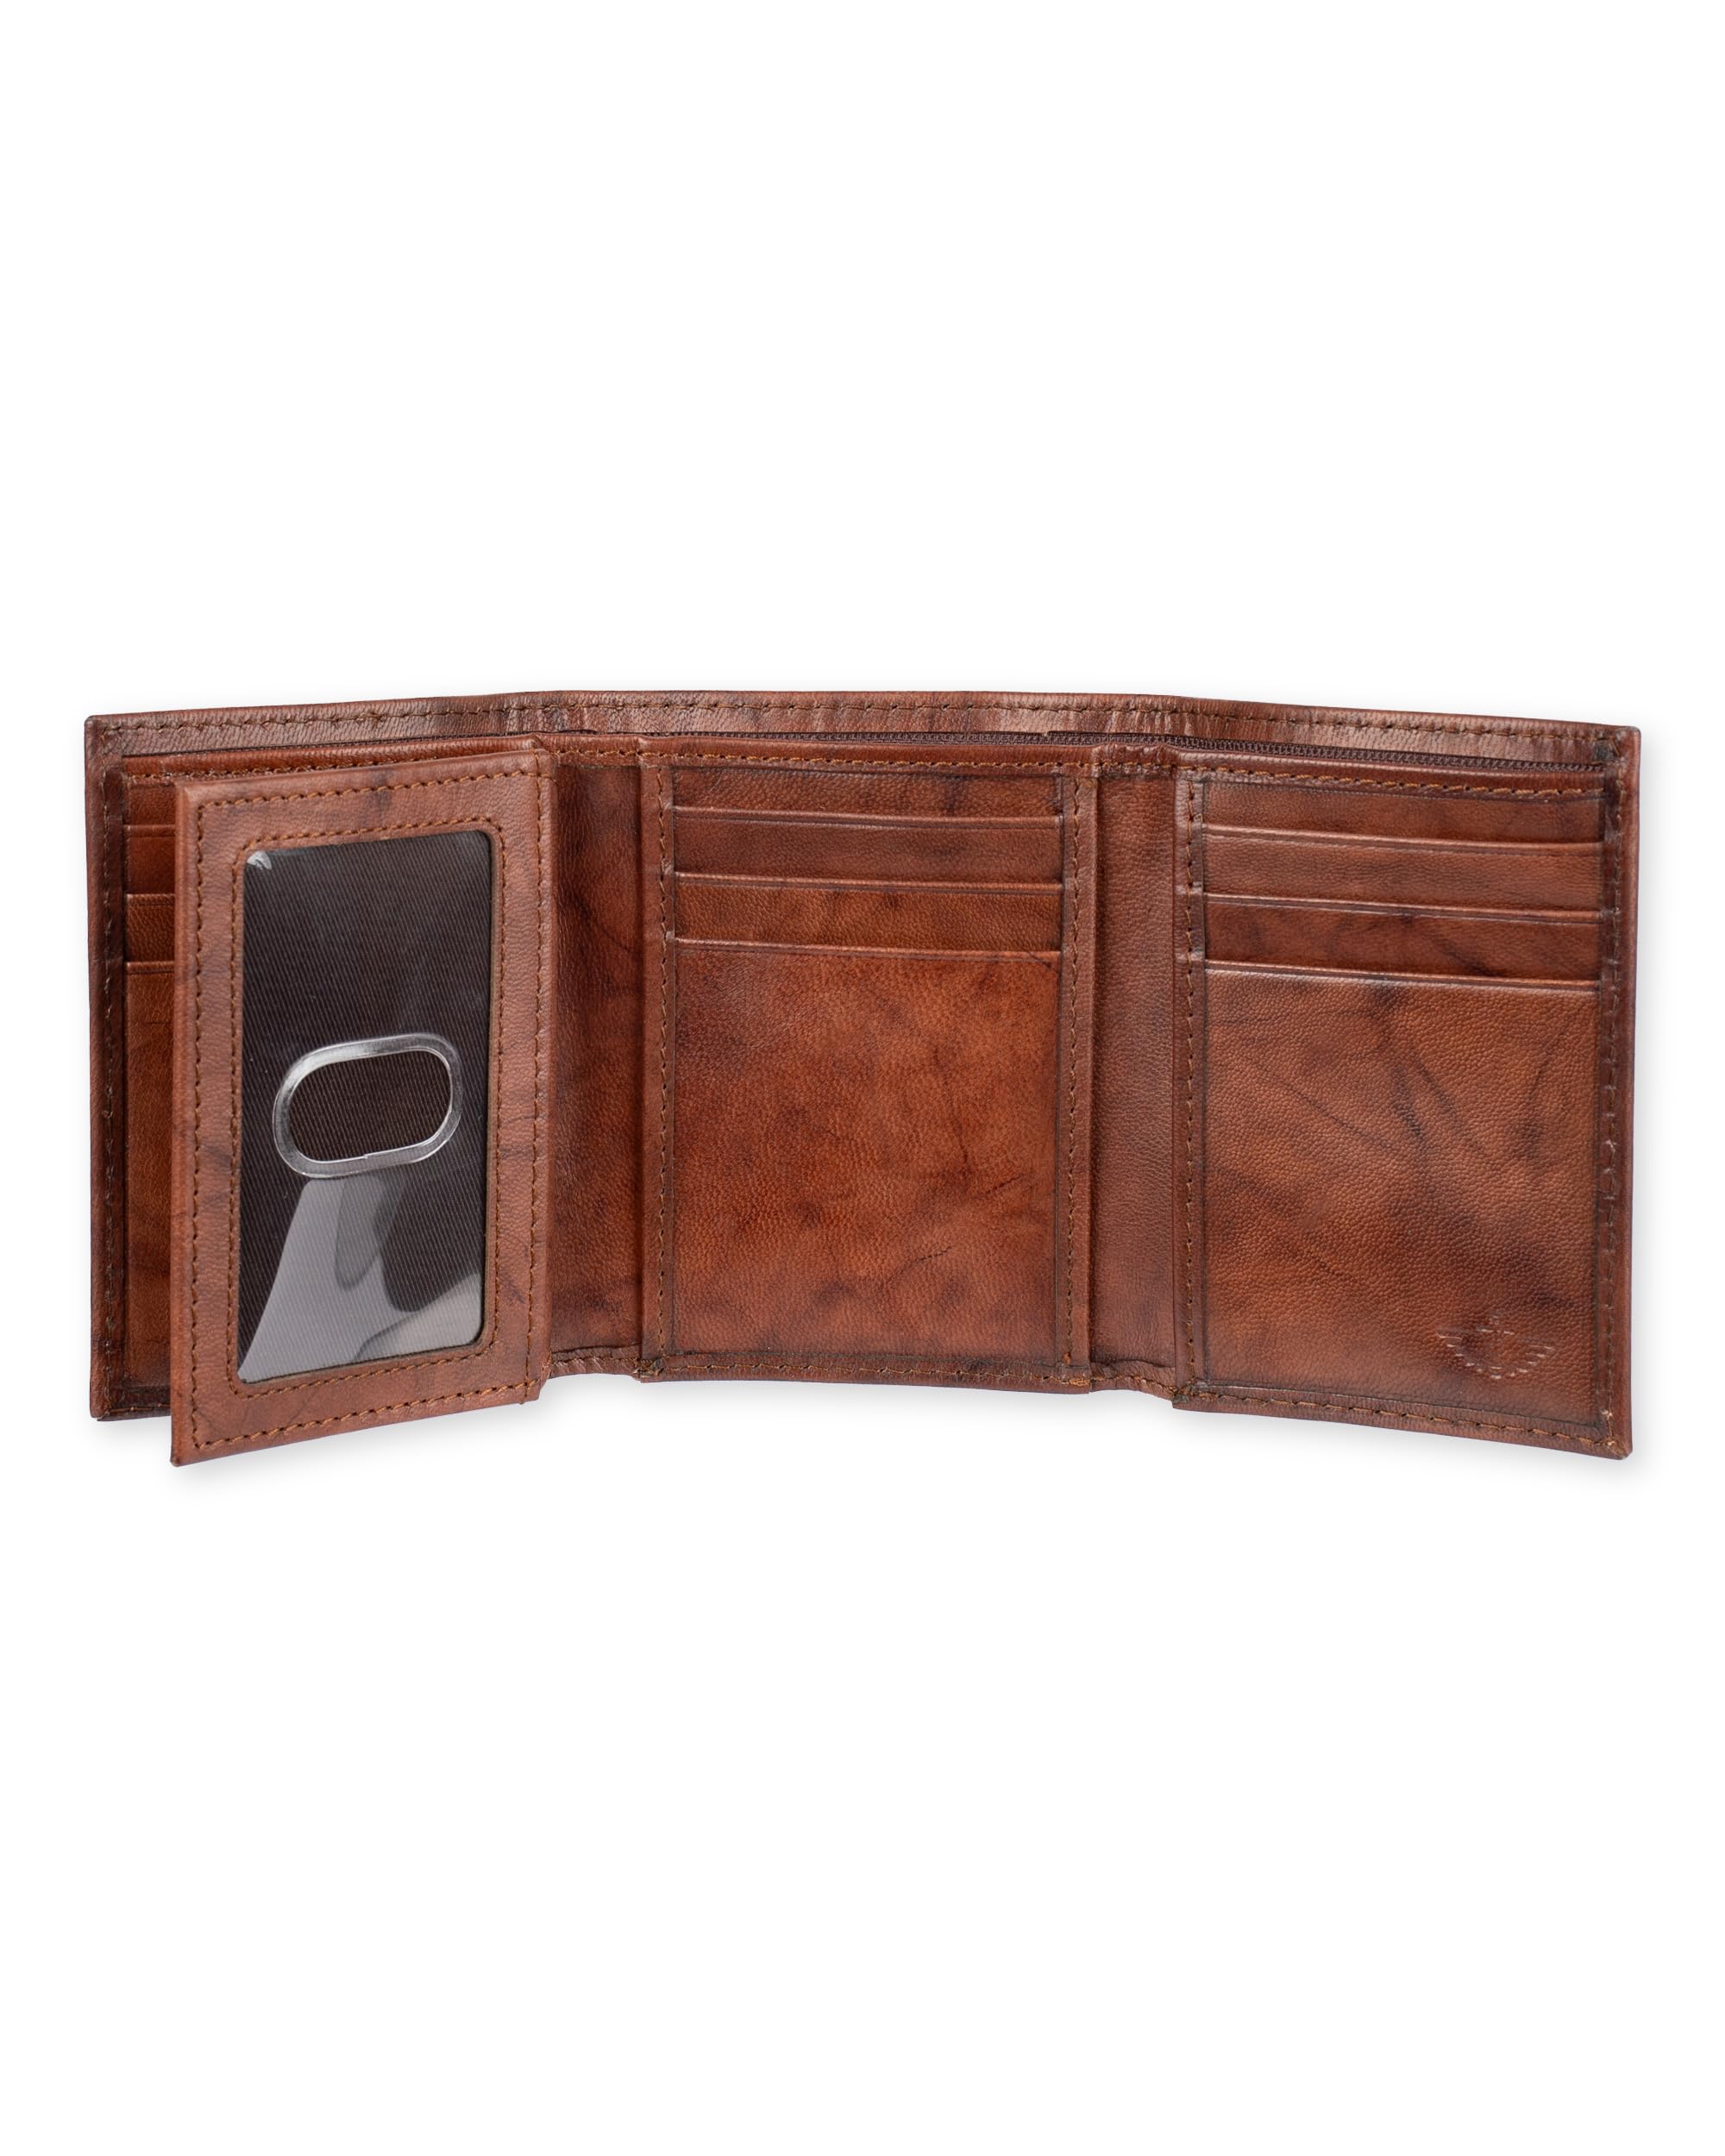 Dockers Men's RFID Extra Capacity Trifold Wallet with Zipper, Brown, One Size